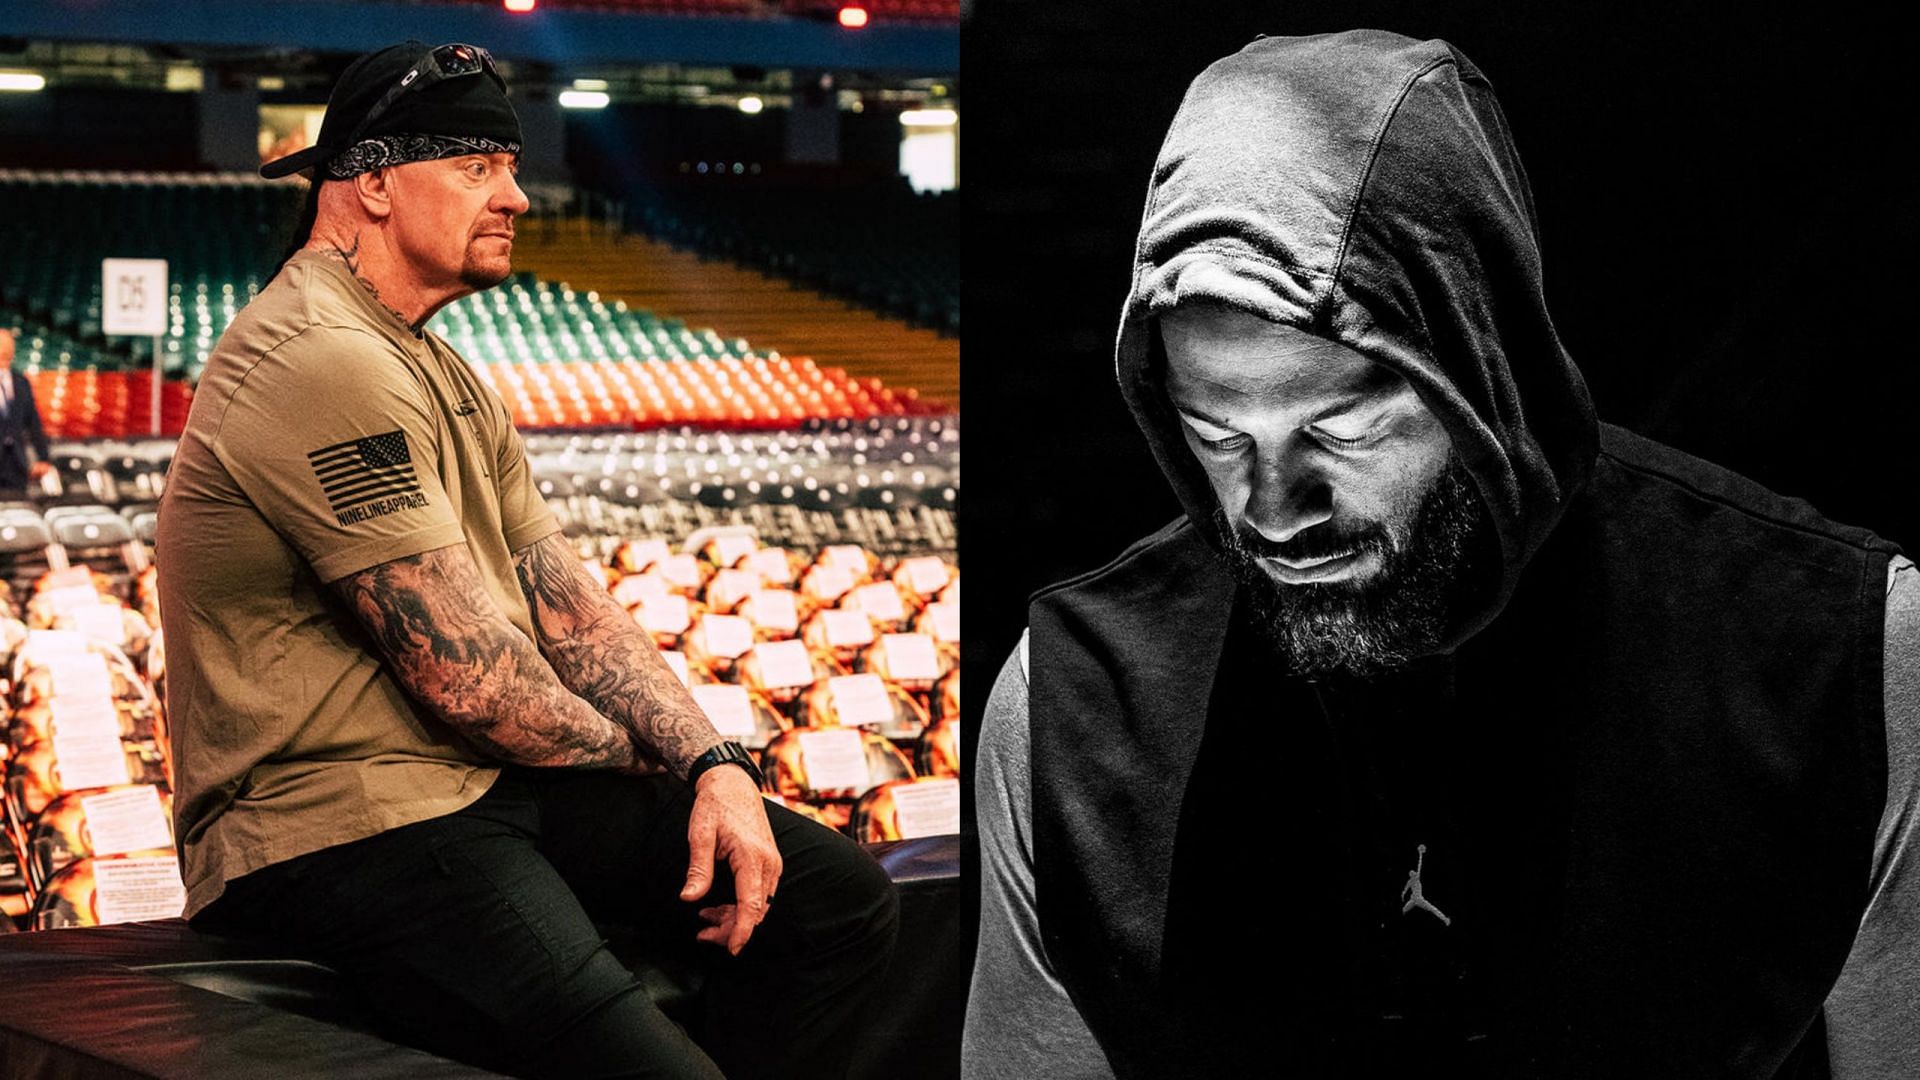 The Undertaker (left); Roman Reigns (right)